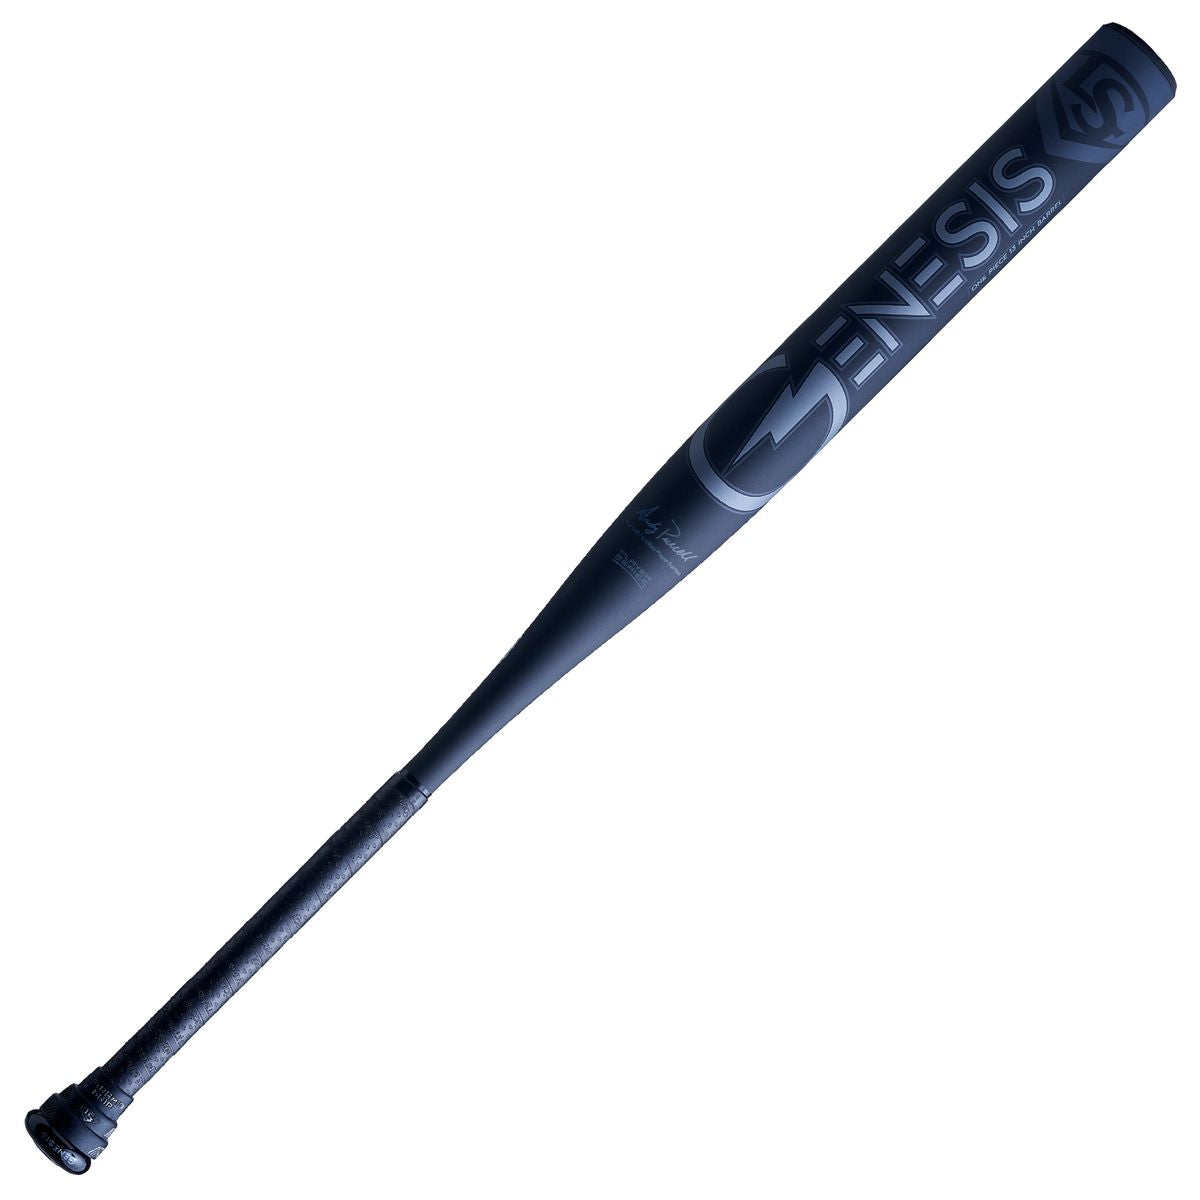 Louisville Slugger Genesis Andy Purcell 1-PC Endload 13" USSSA